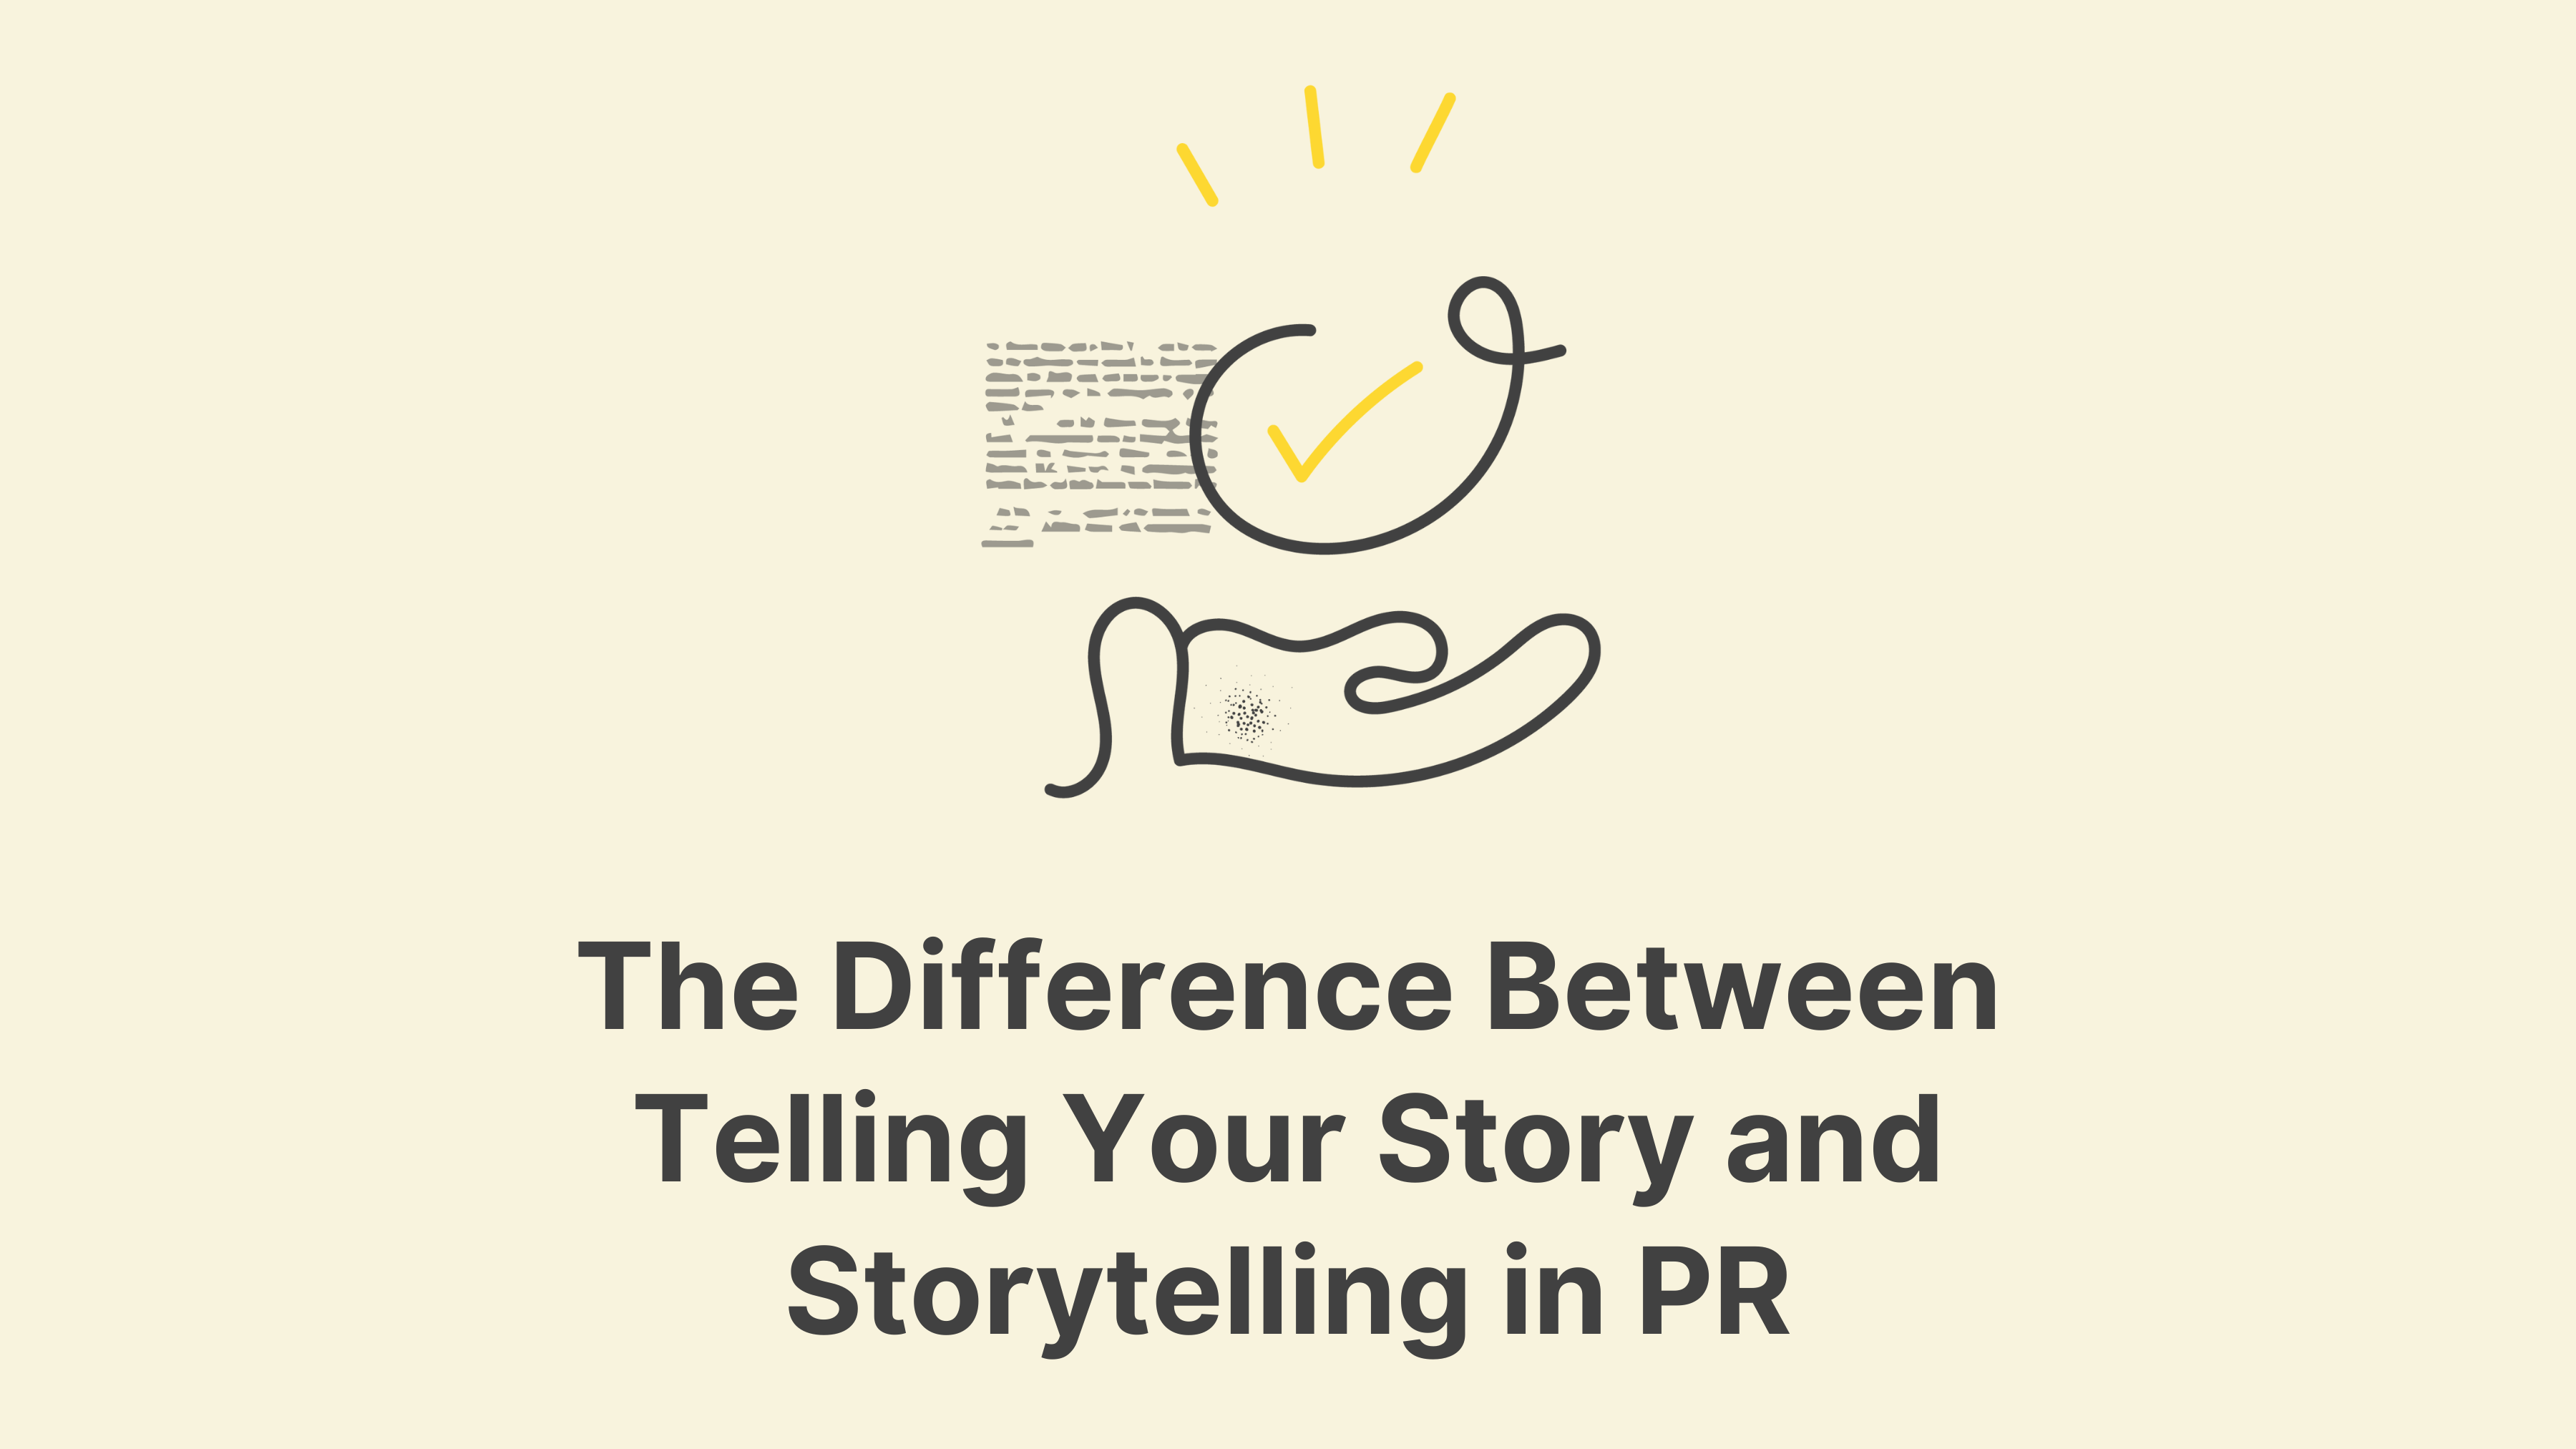 The Difference Between Telling Your Story and Storytelling in PR